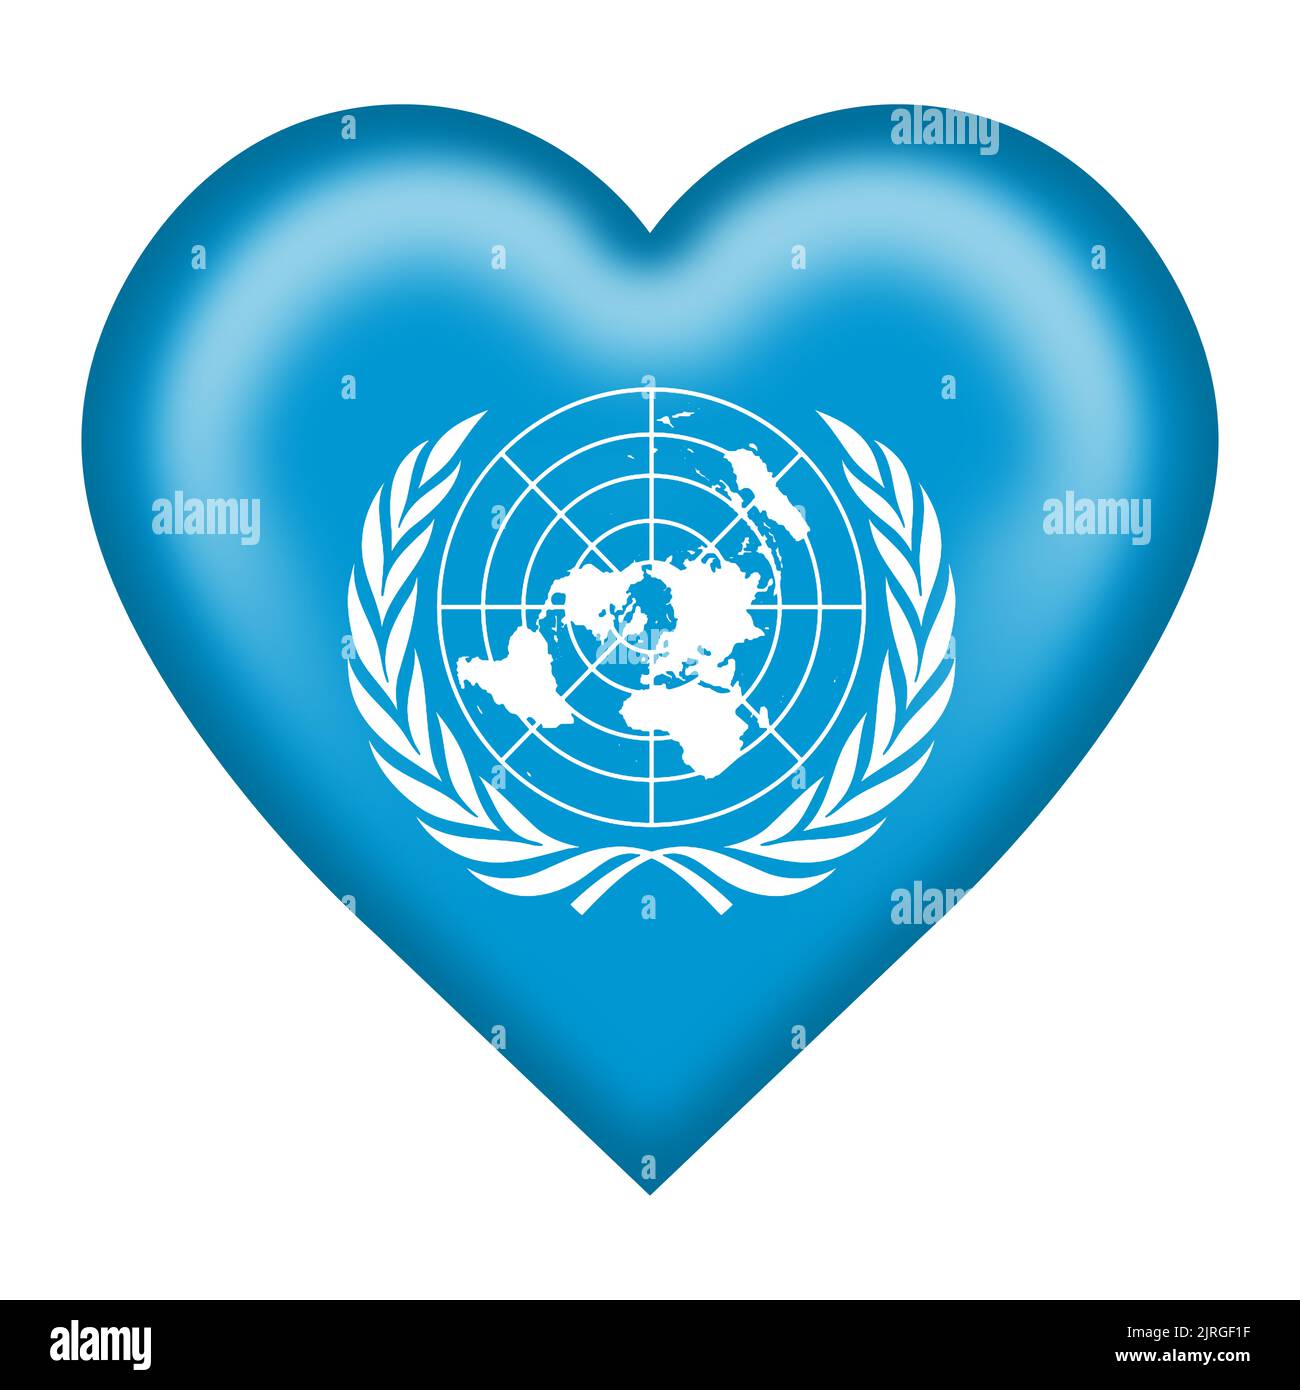 United Nations flag heart button 3d illustration with clipping path Stock Photo